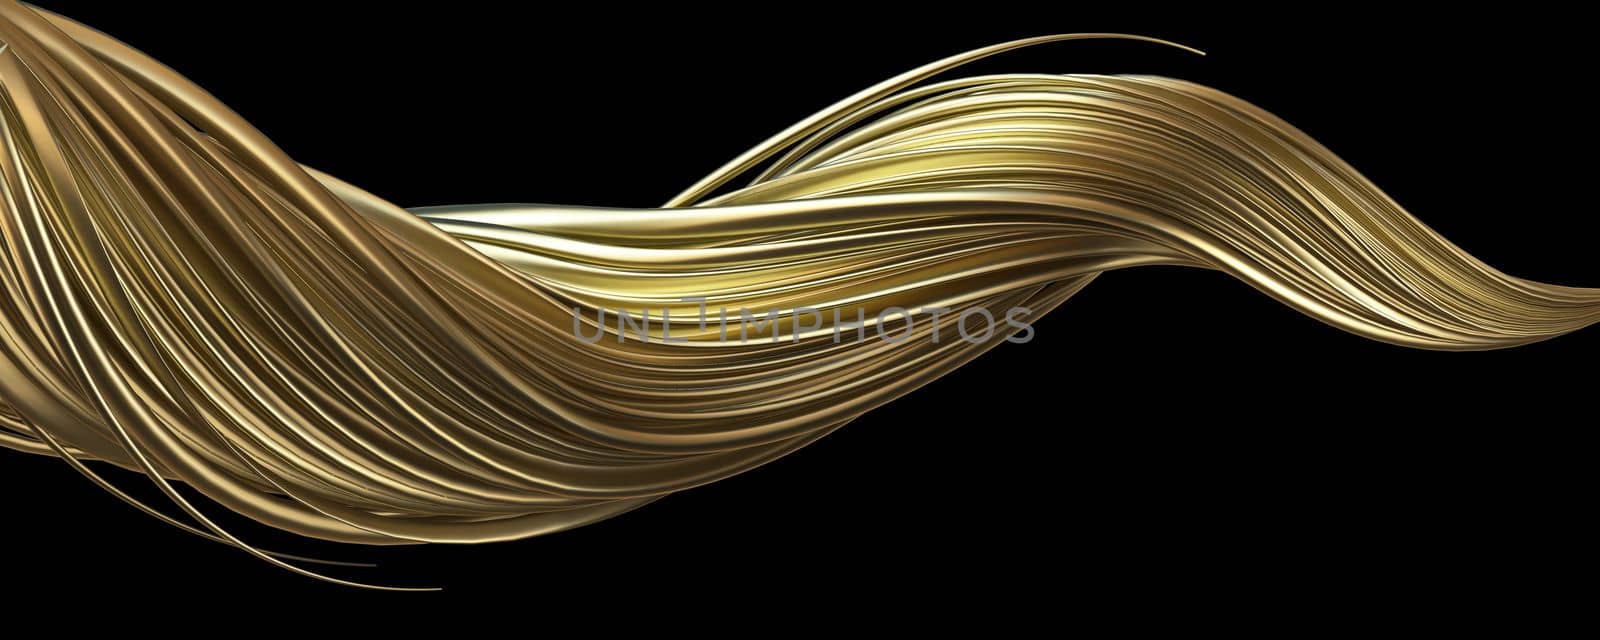 Golden hair abstract background 3D by djmilic